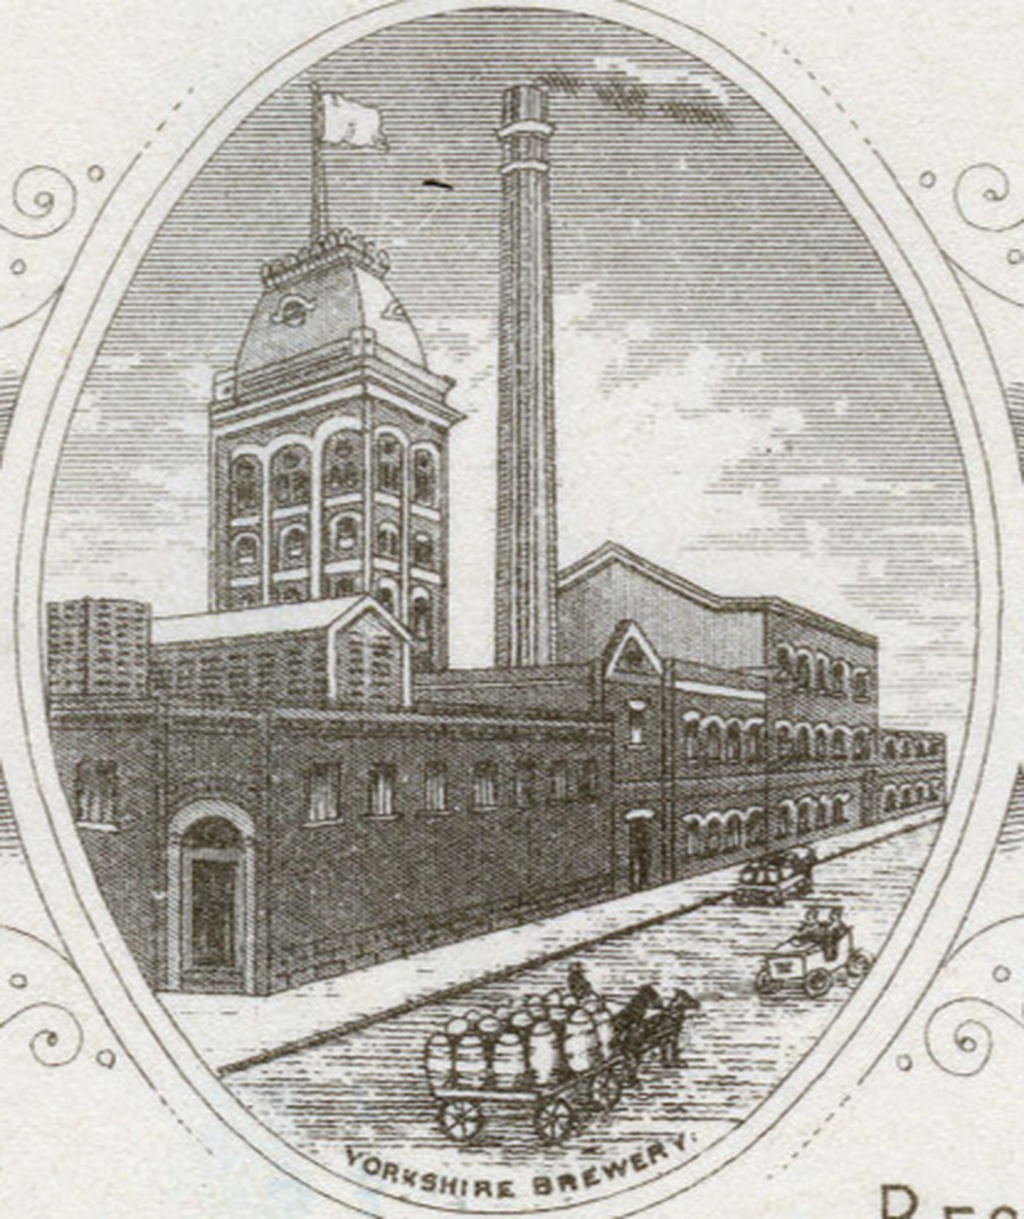 Detail from Carlton and United Breweries letterhead, 1903, showing the Yorkshire Breweries tower